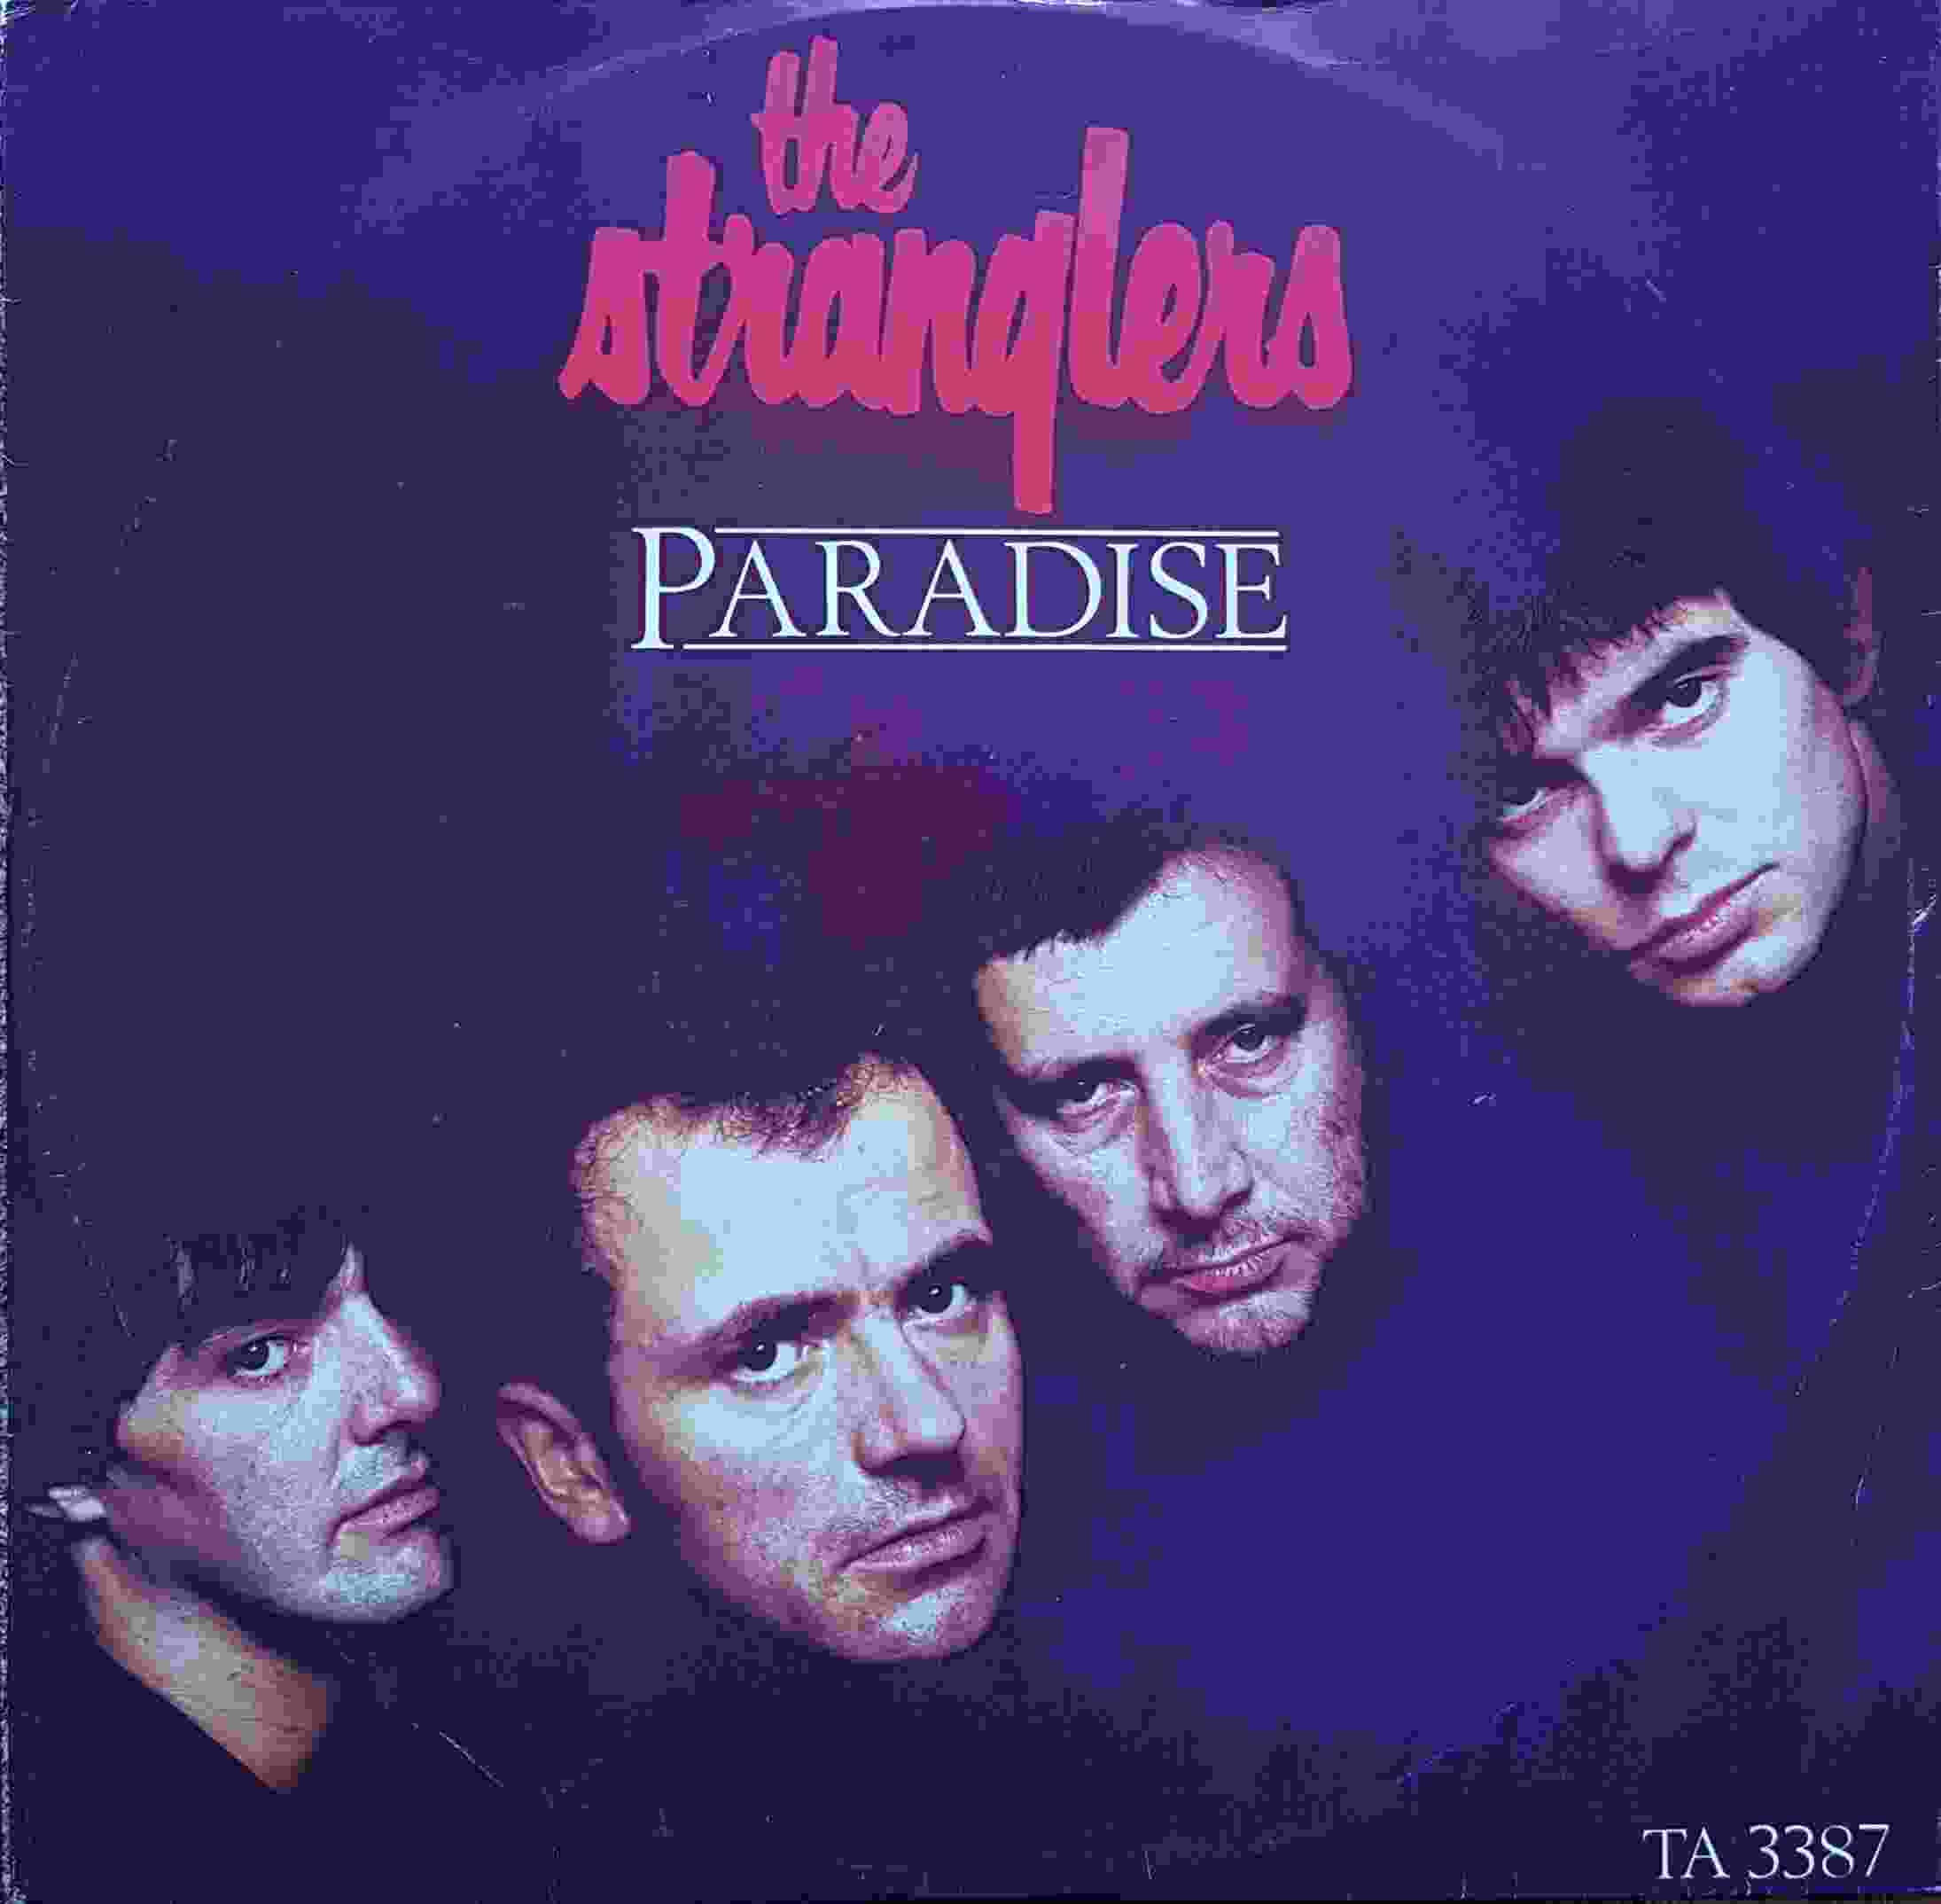 Picture of TA 3387 Paradise by artist The Stranglers from The Stranglers 12inches